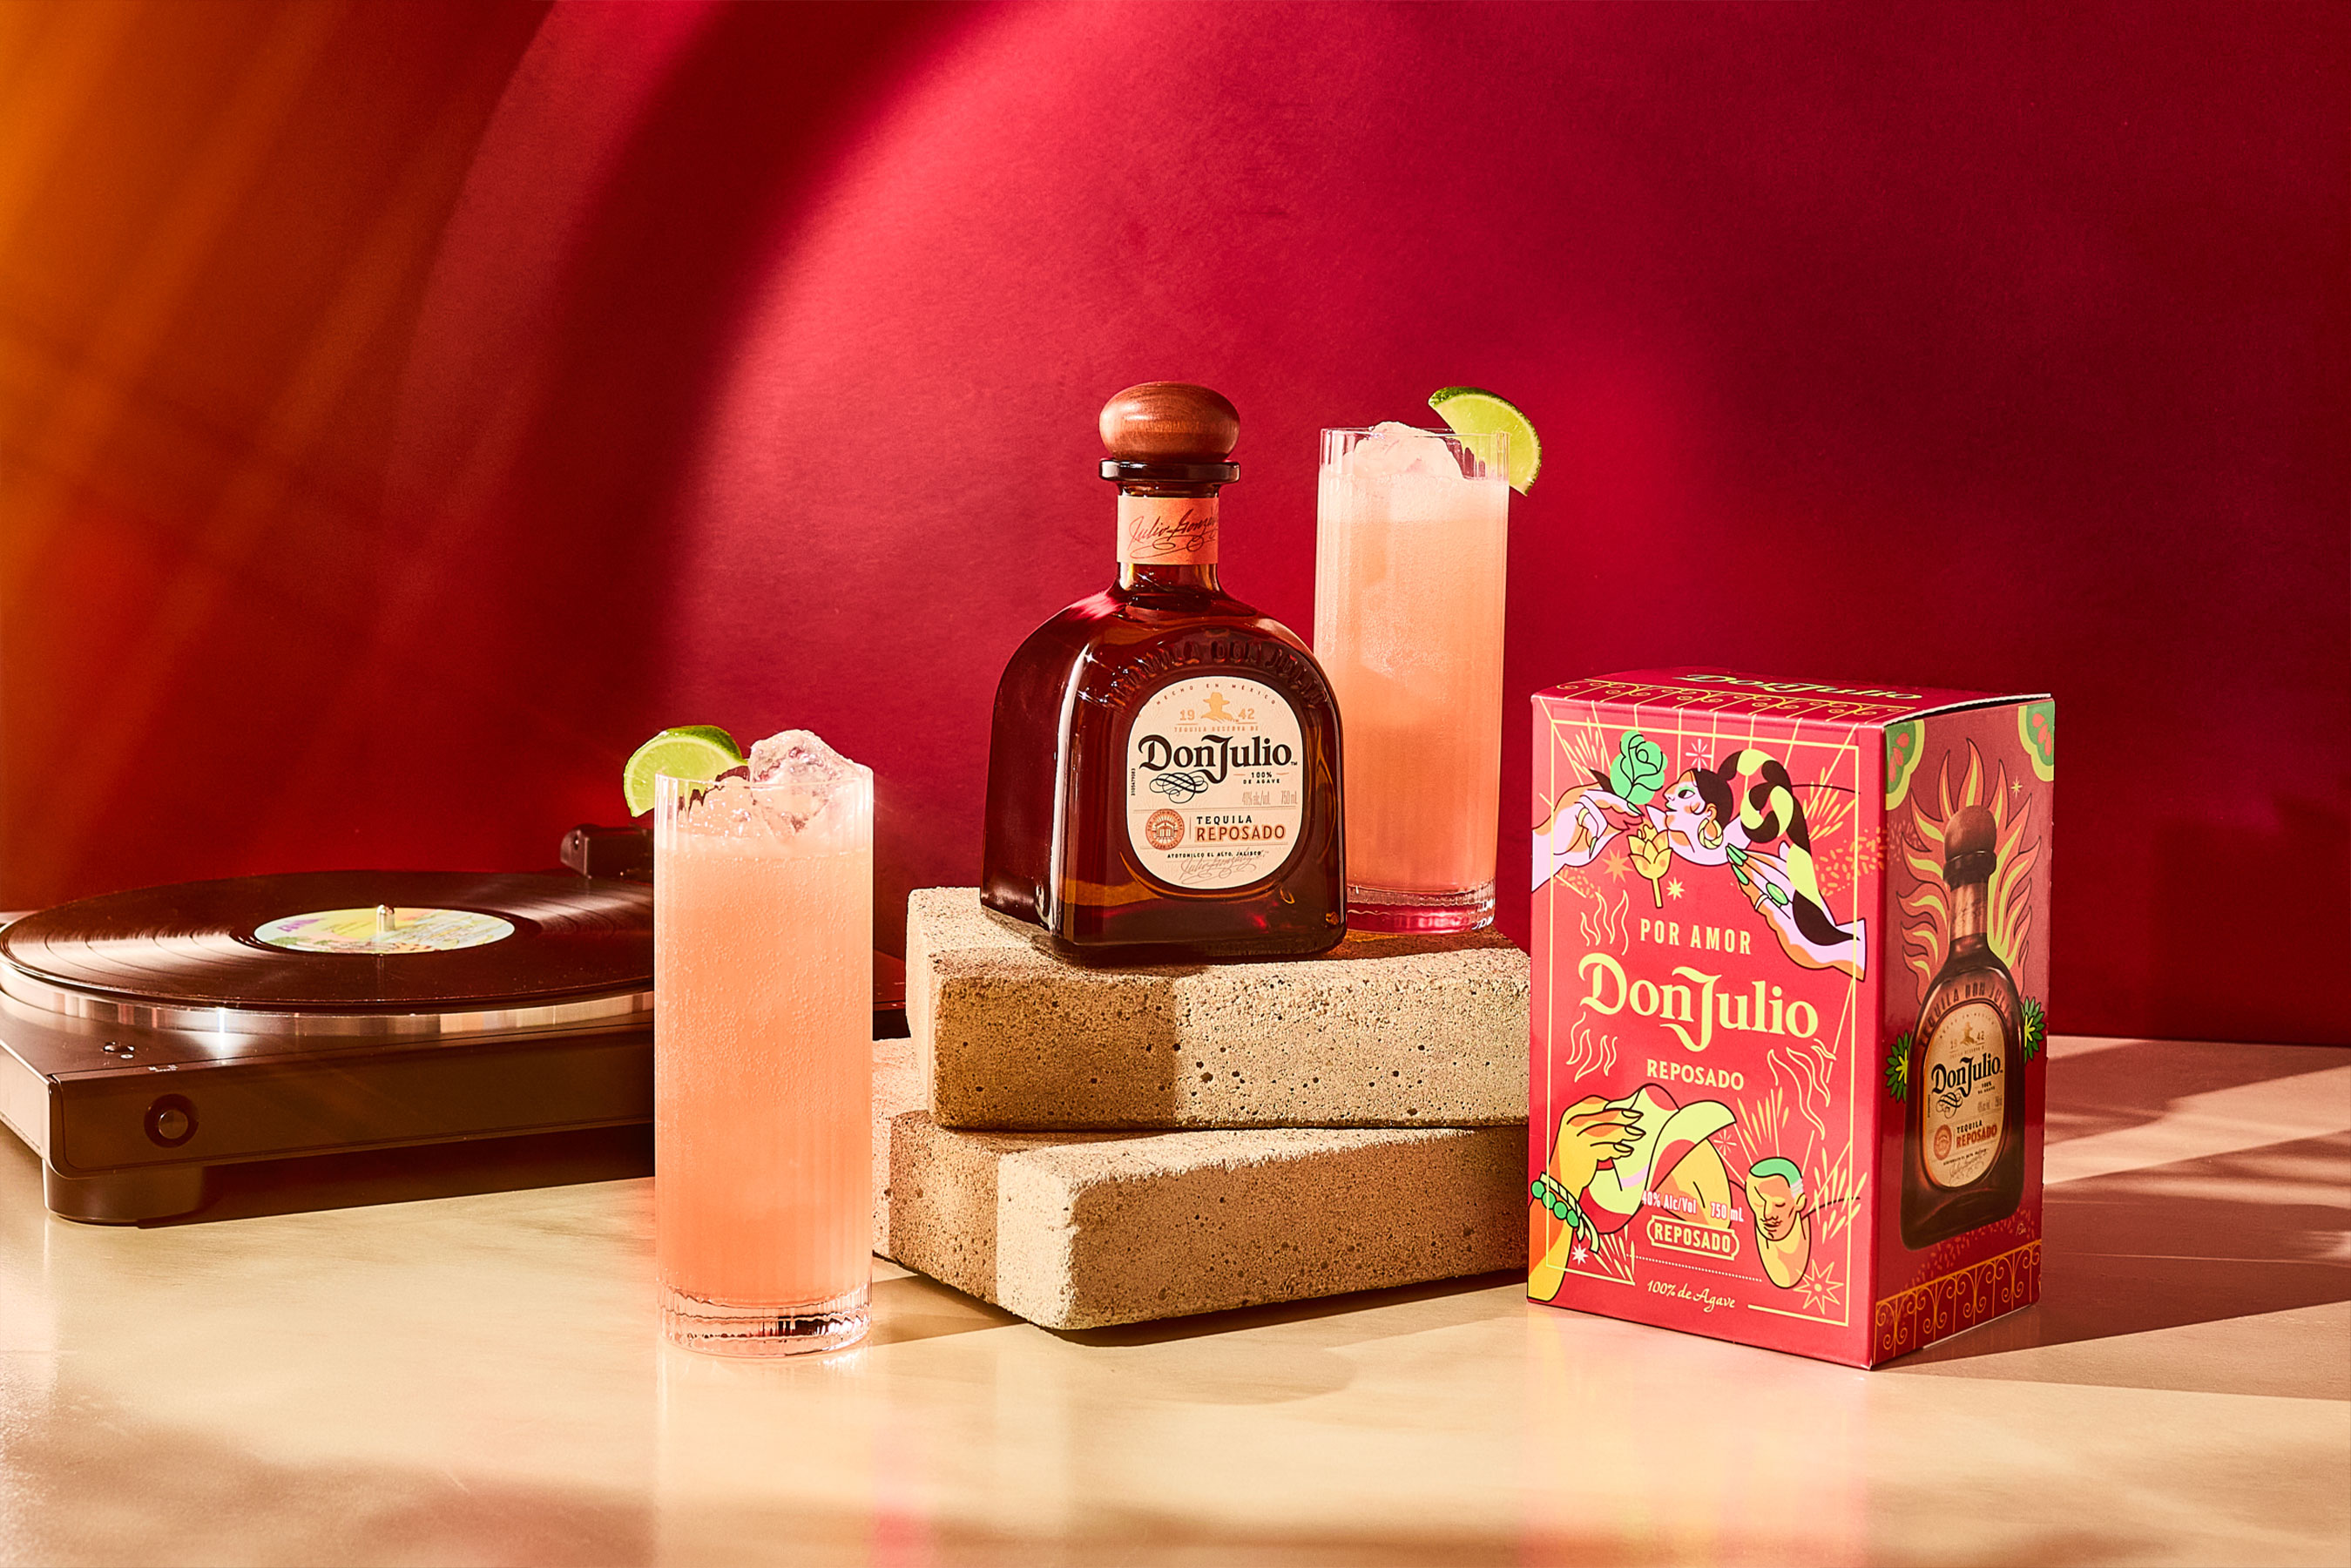 Tequila Don Julio Reposado ‘A Summer of Mexicana’ Artist Edition and signature Paloma cocktail.